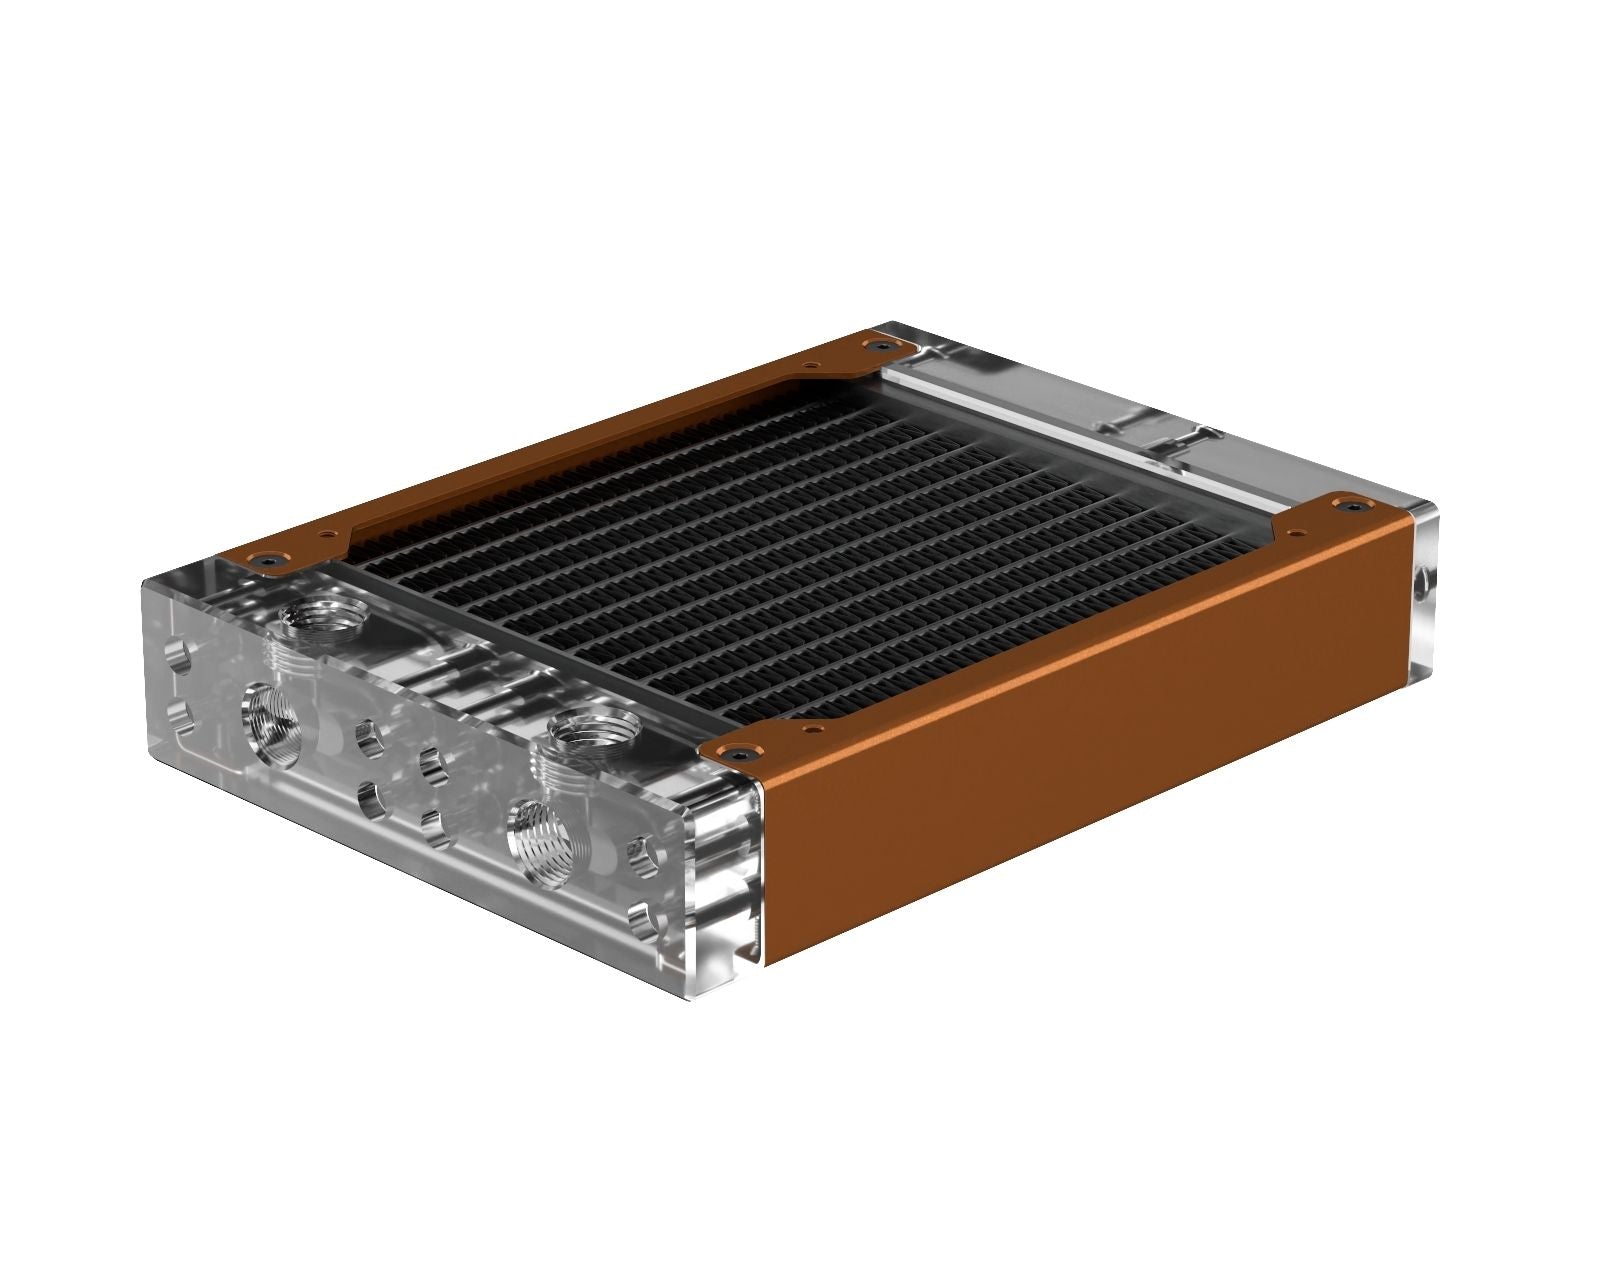 PrimoChill 120SL (30mm) EXIMO Modular Radiator, Clear Acrylic, 1x120mm, Single Fan (R-SL-A12) Available in 20+ Colors, Assembled in USA and Custom Watercooling Loop Ready - Copper